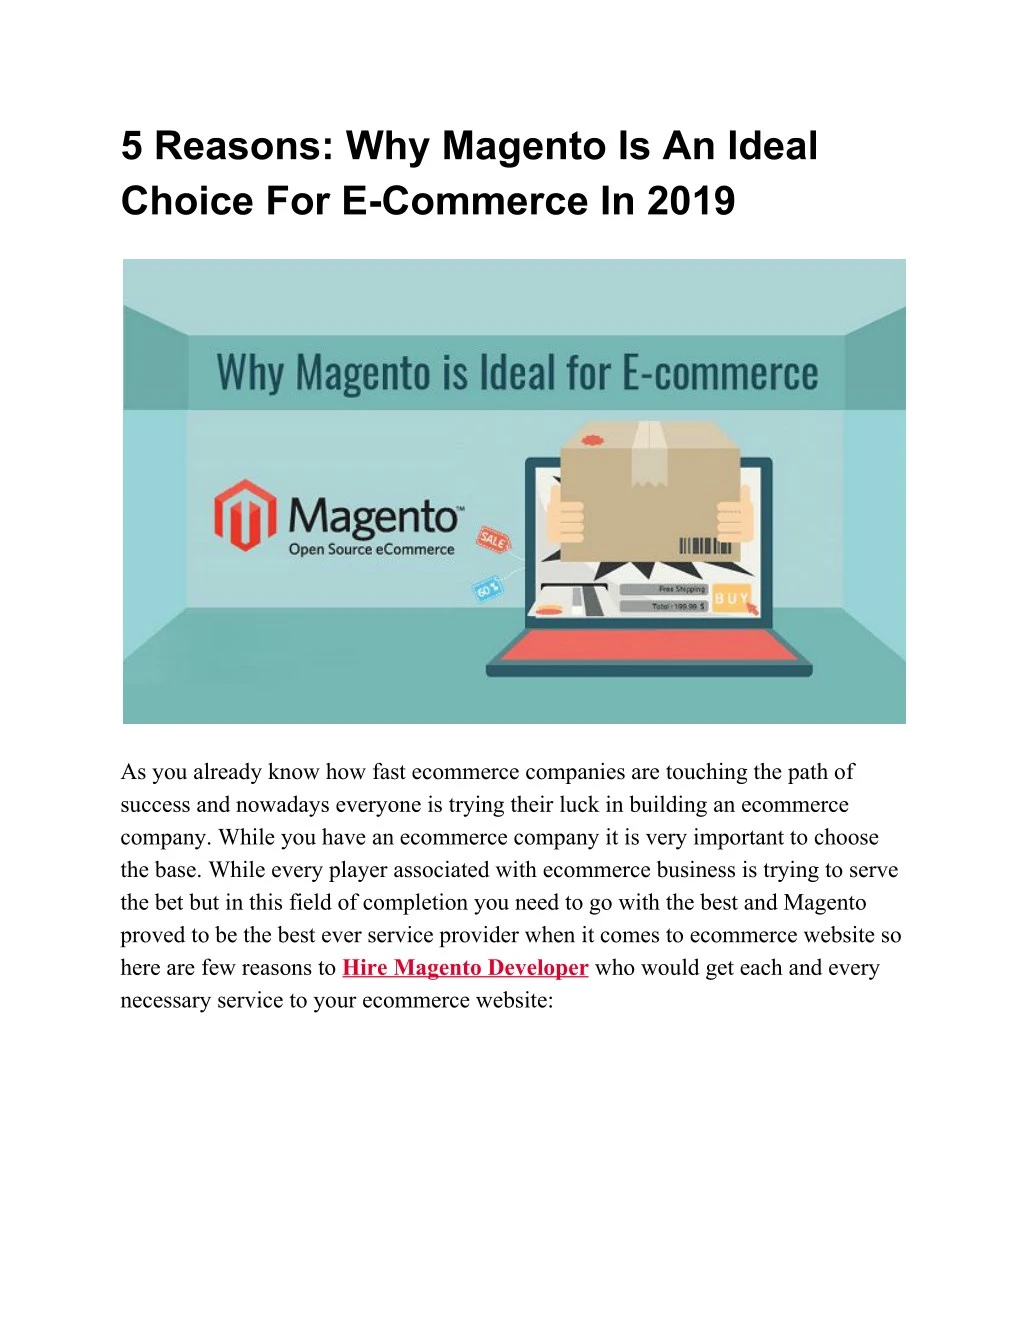 5 reasons why magento is an ideal choice